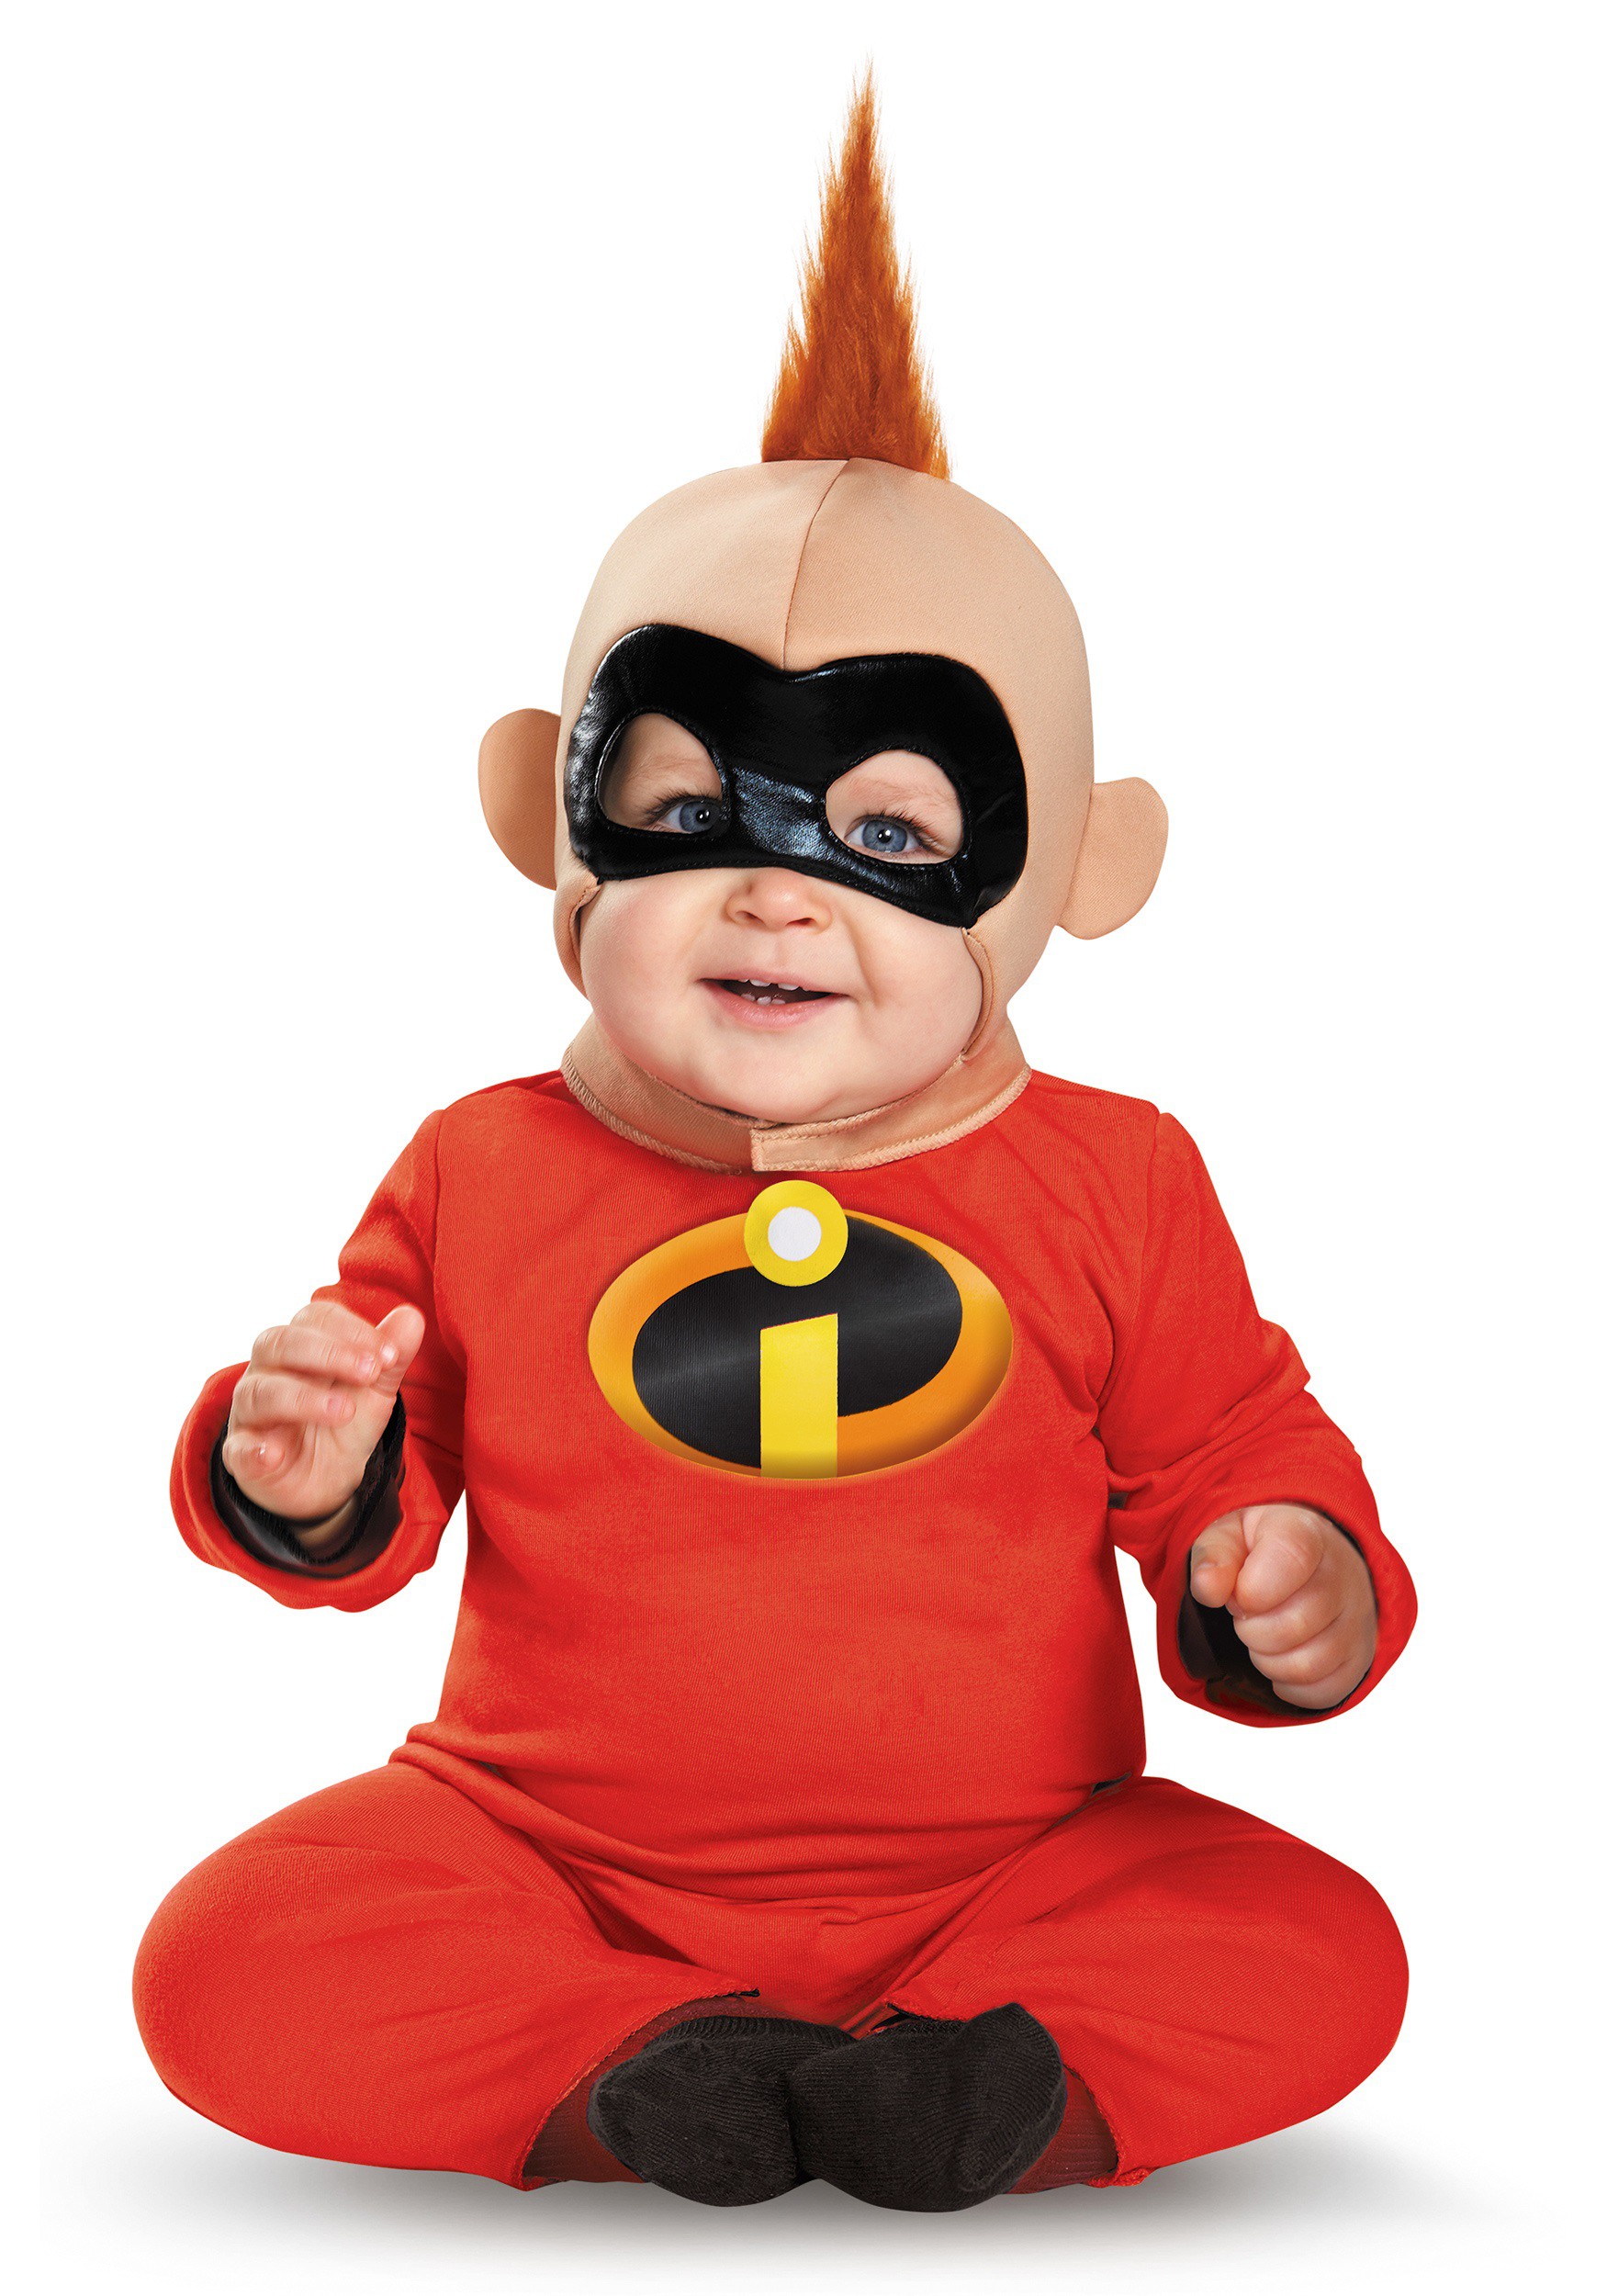 Baby Jack Jack Deluxe Infant Costume - Incredibles Infant costume